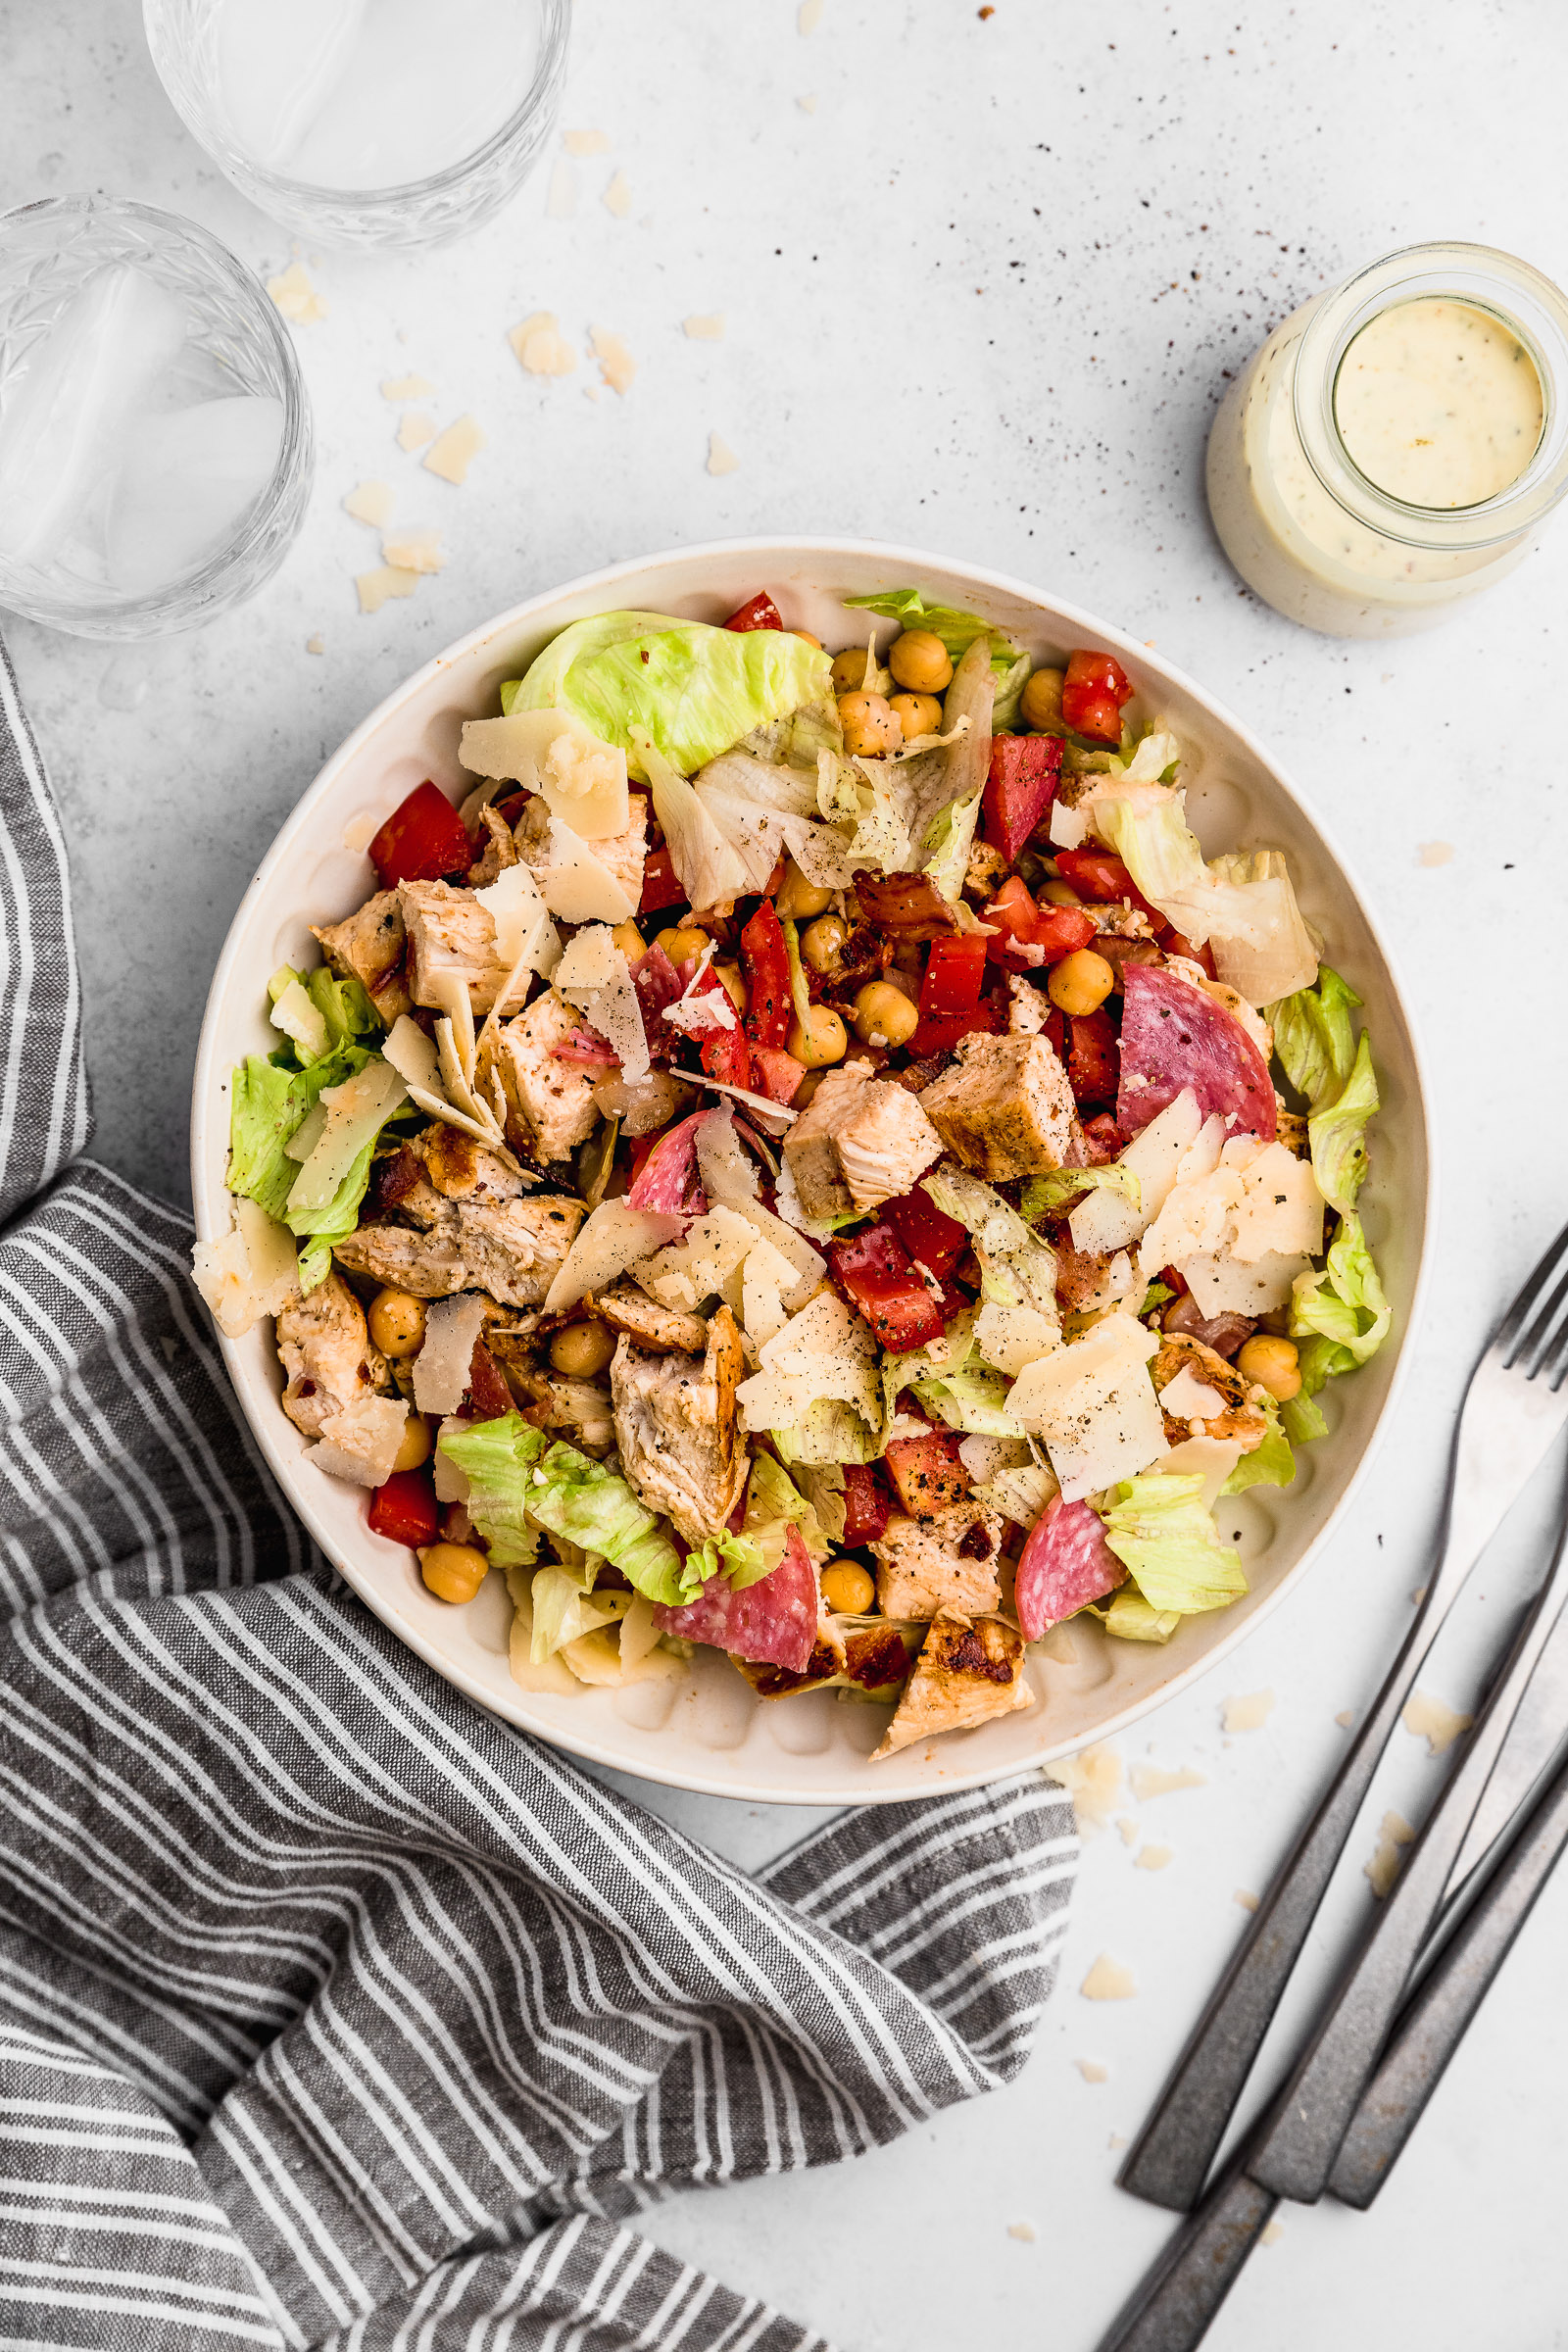 Jennifer Aniston's Salad that she ate on the set of FRIENDS. A Cobb salad with lettuce, chickpeas, tomatoes, salami, chicken, bacon, and pecorino cheese. 